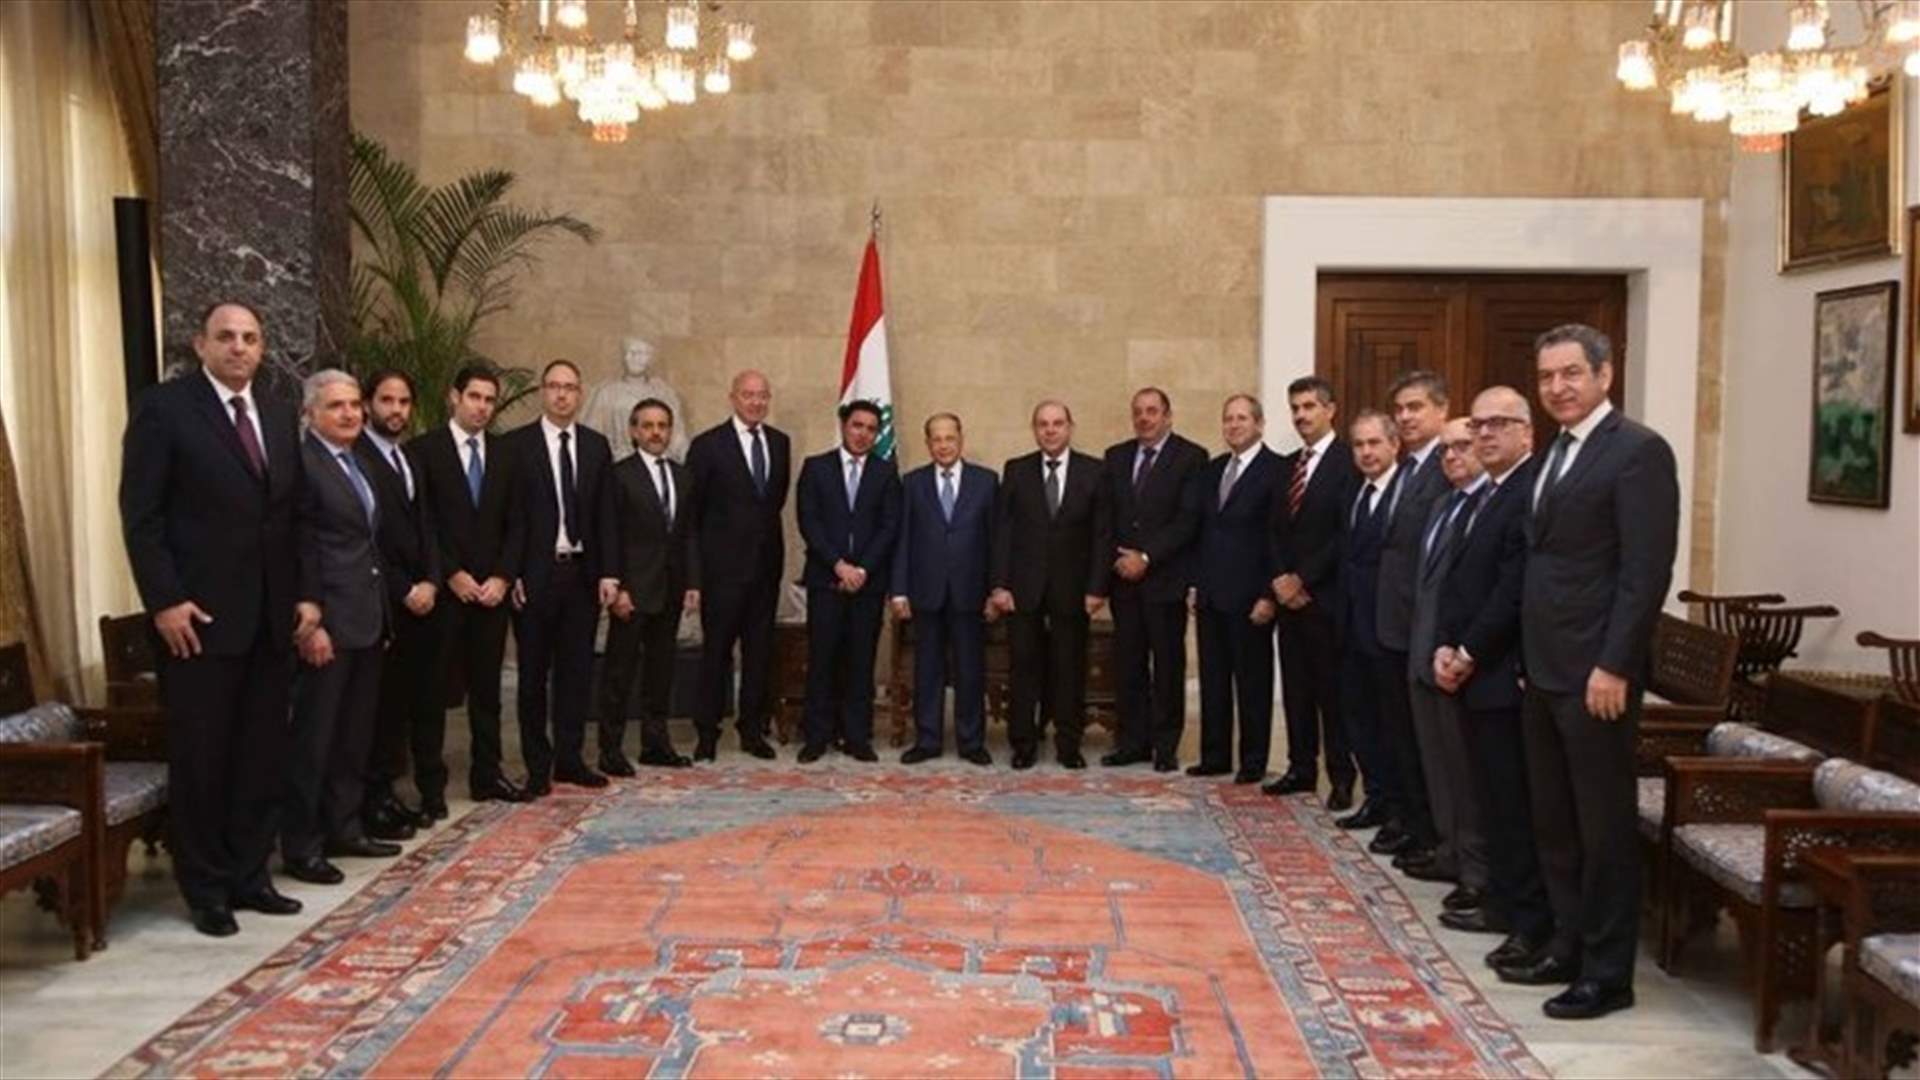 President Aoun says new electoral law will be passed, parliamentary elections will be held on time